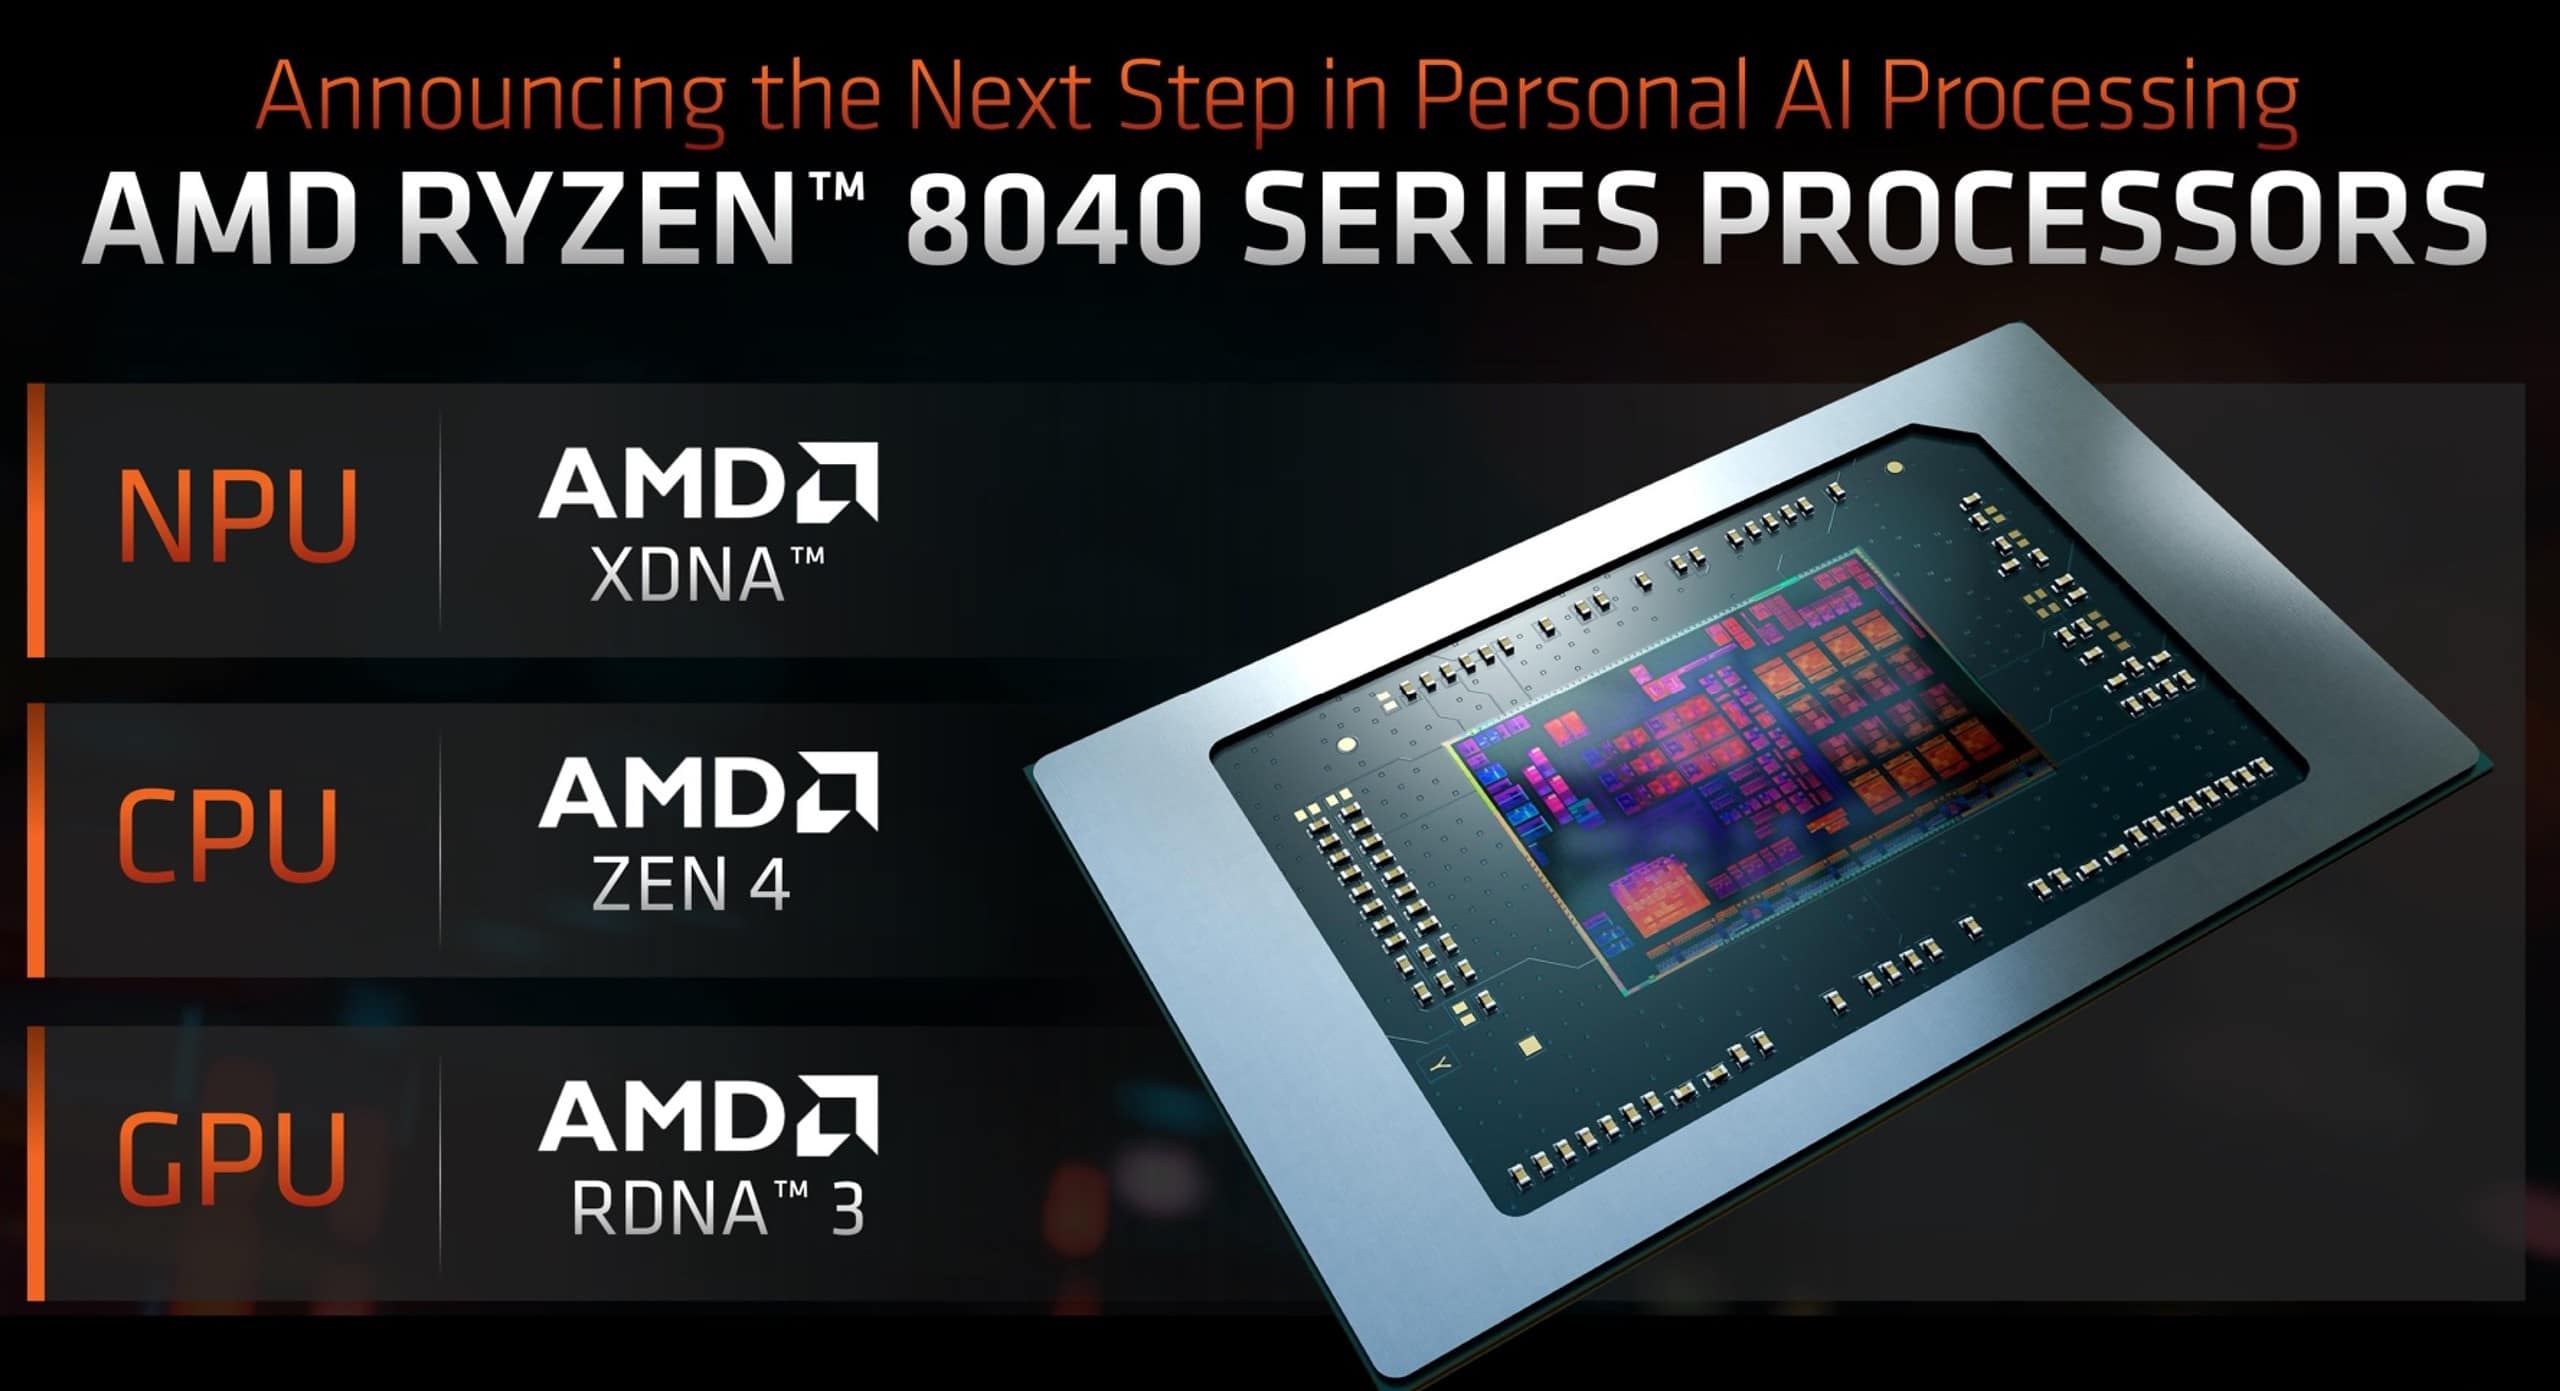 AMD broadens AI portfolio with new Ryzen PRO 8040 series processors for business users